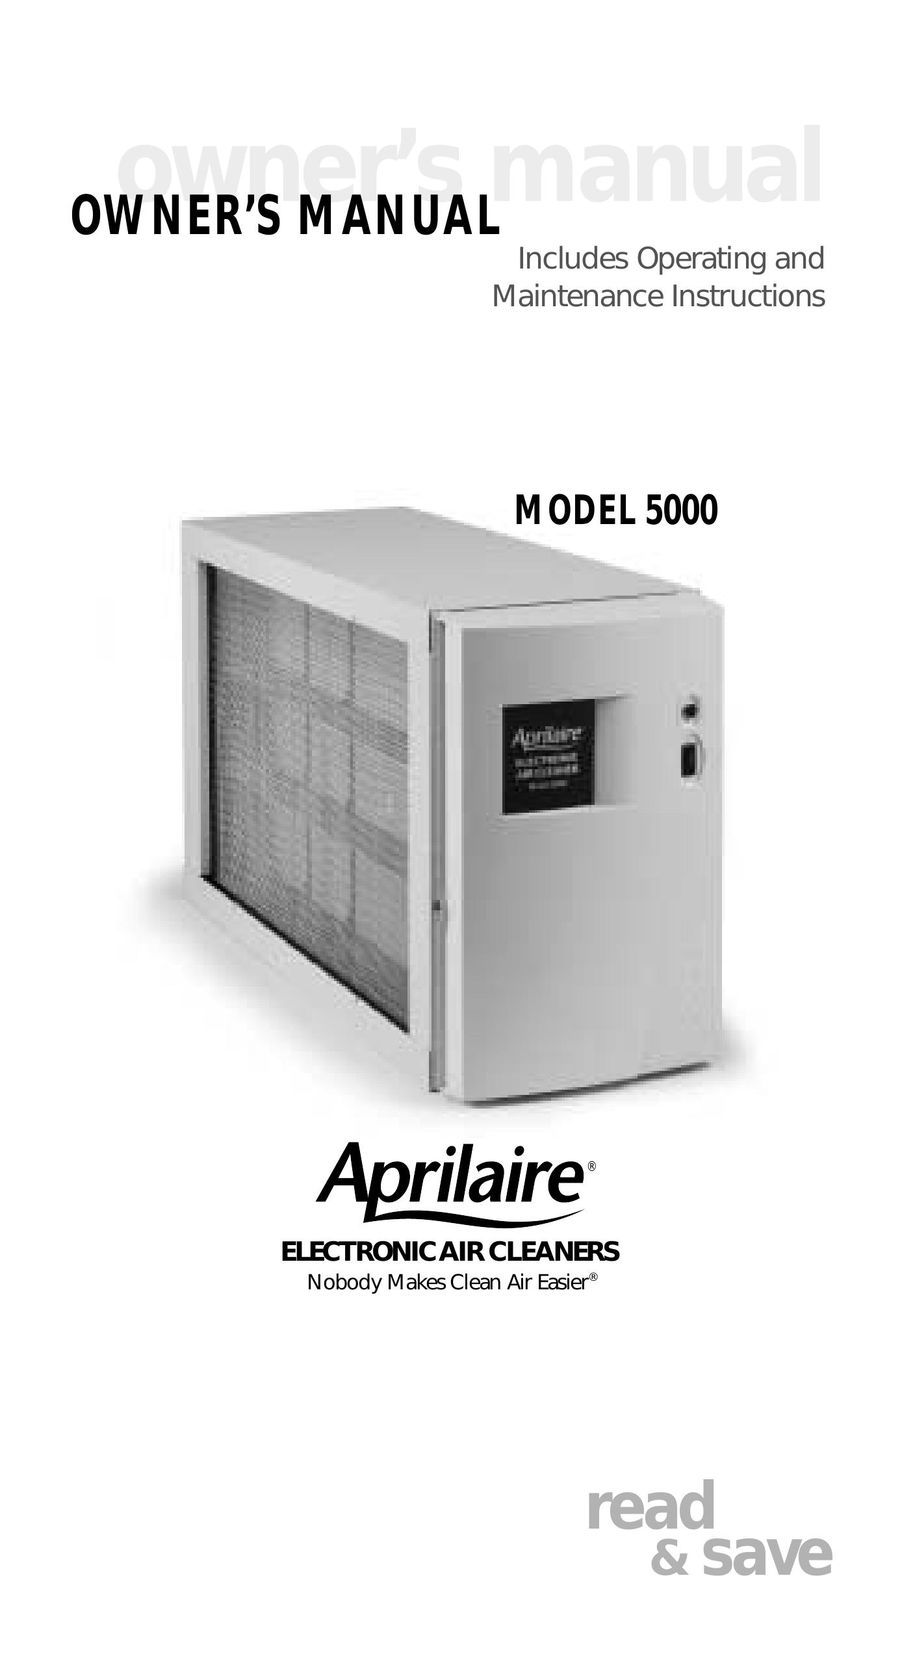 Aprilaire 500 Humidifier User Manual